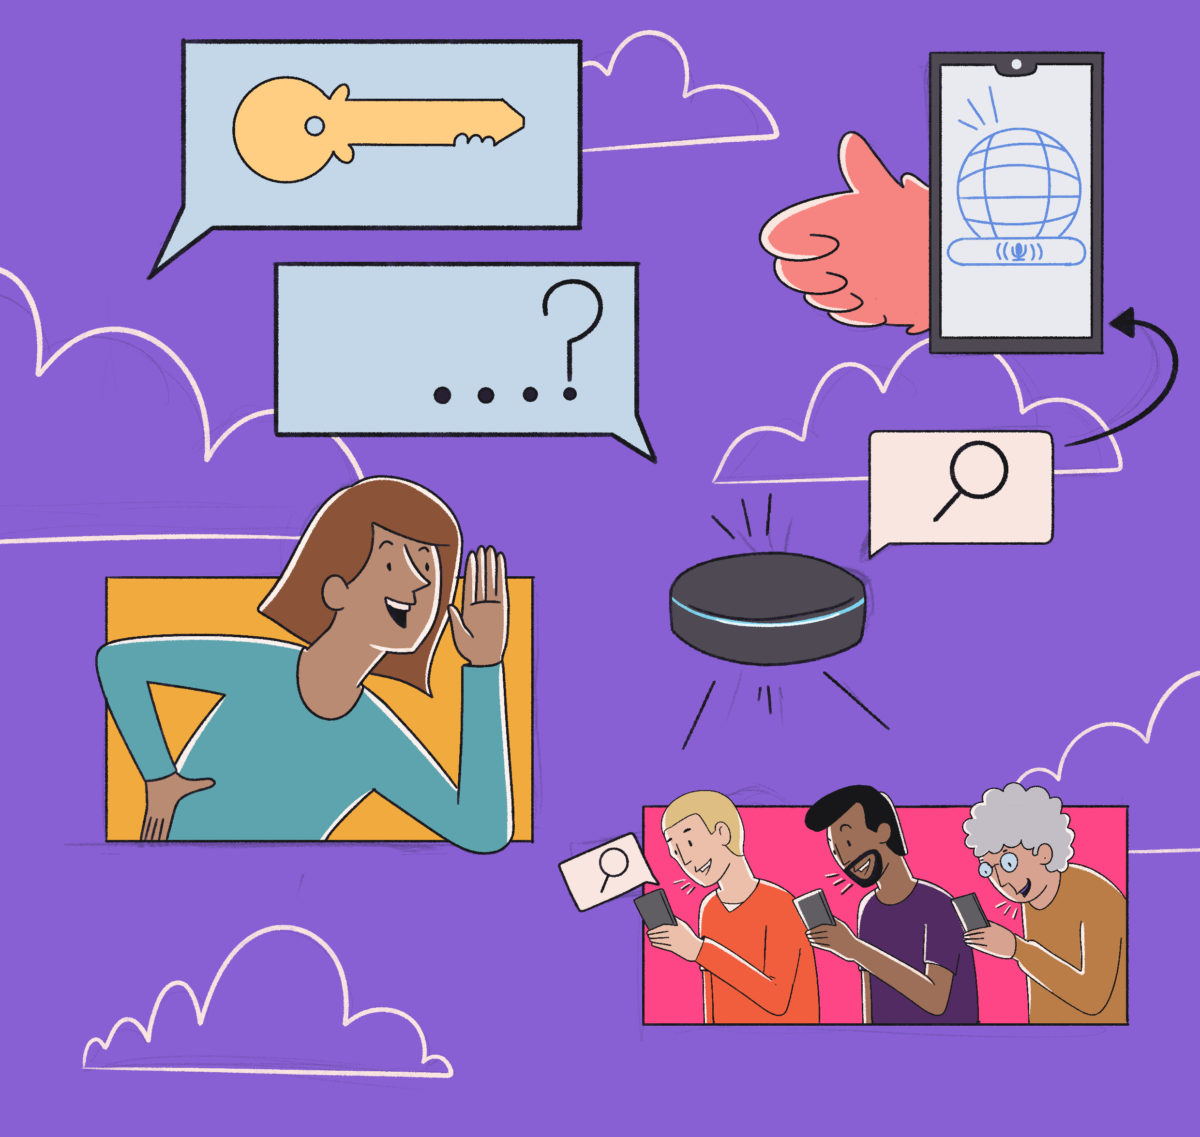 Illustration of different people engaging with various communication methods and technology, symbolizing online interaction and information exchange.